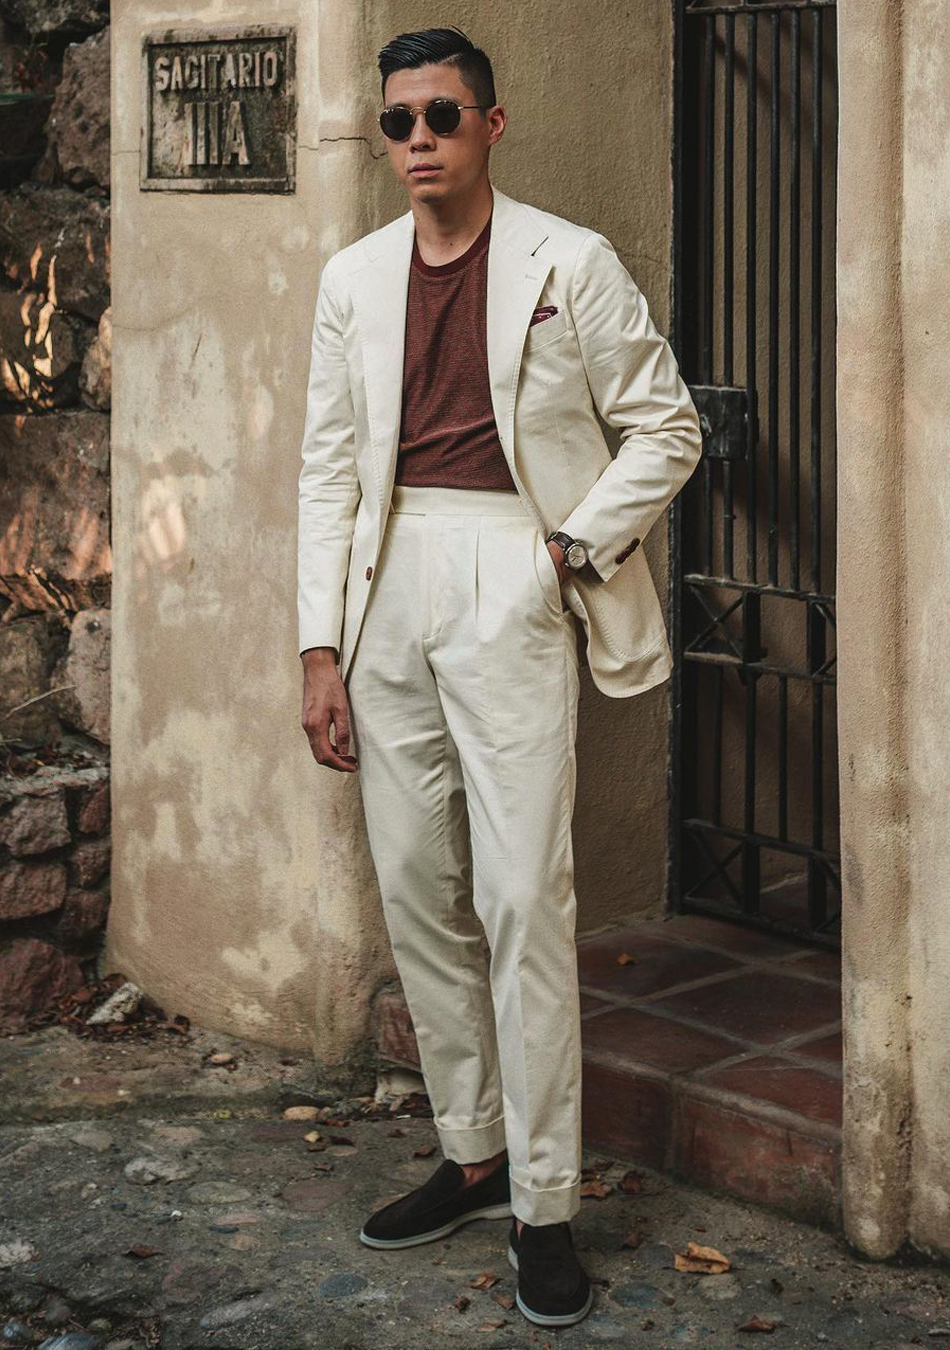 Beige suit, burgundy brown t-shirt, and black loafers